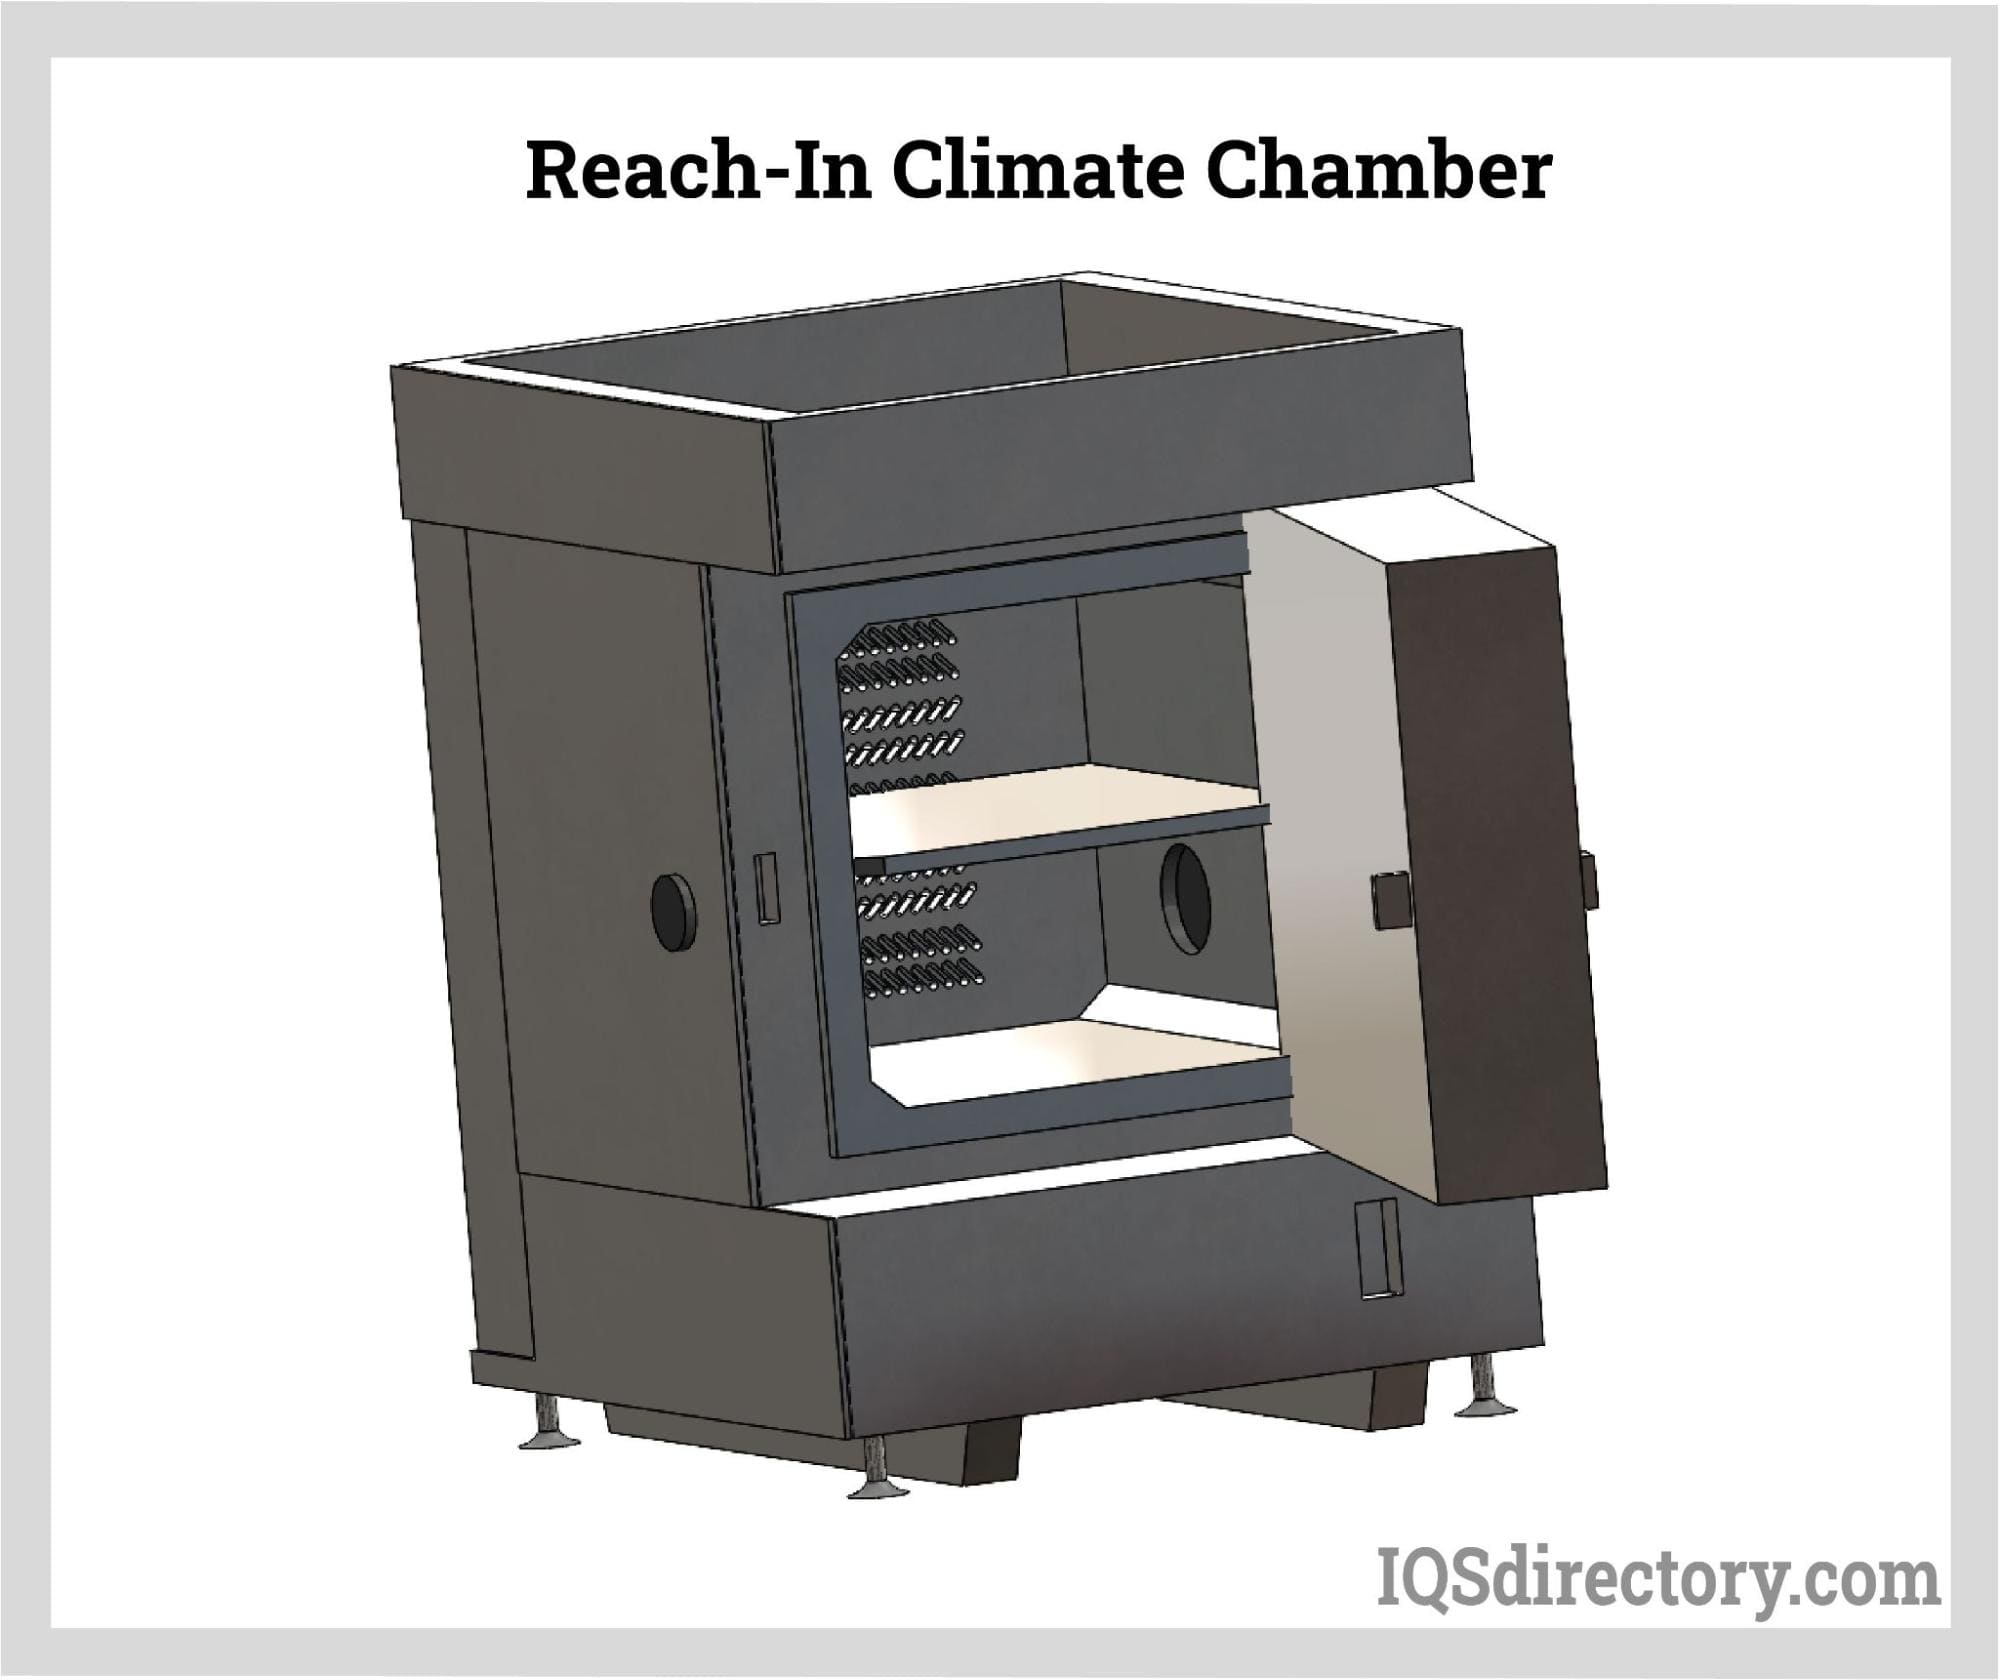 Reach-In Climate Chamber